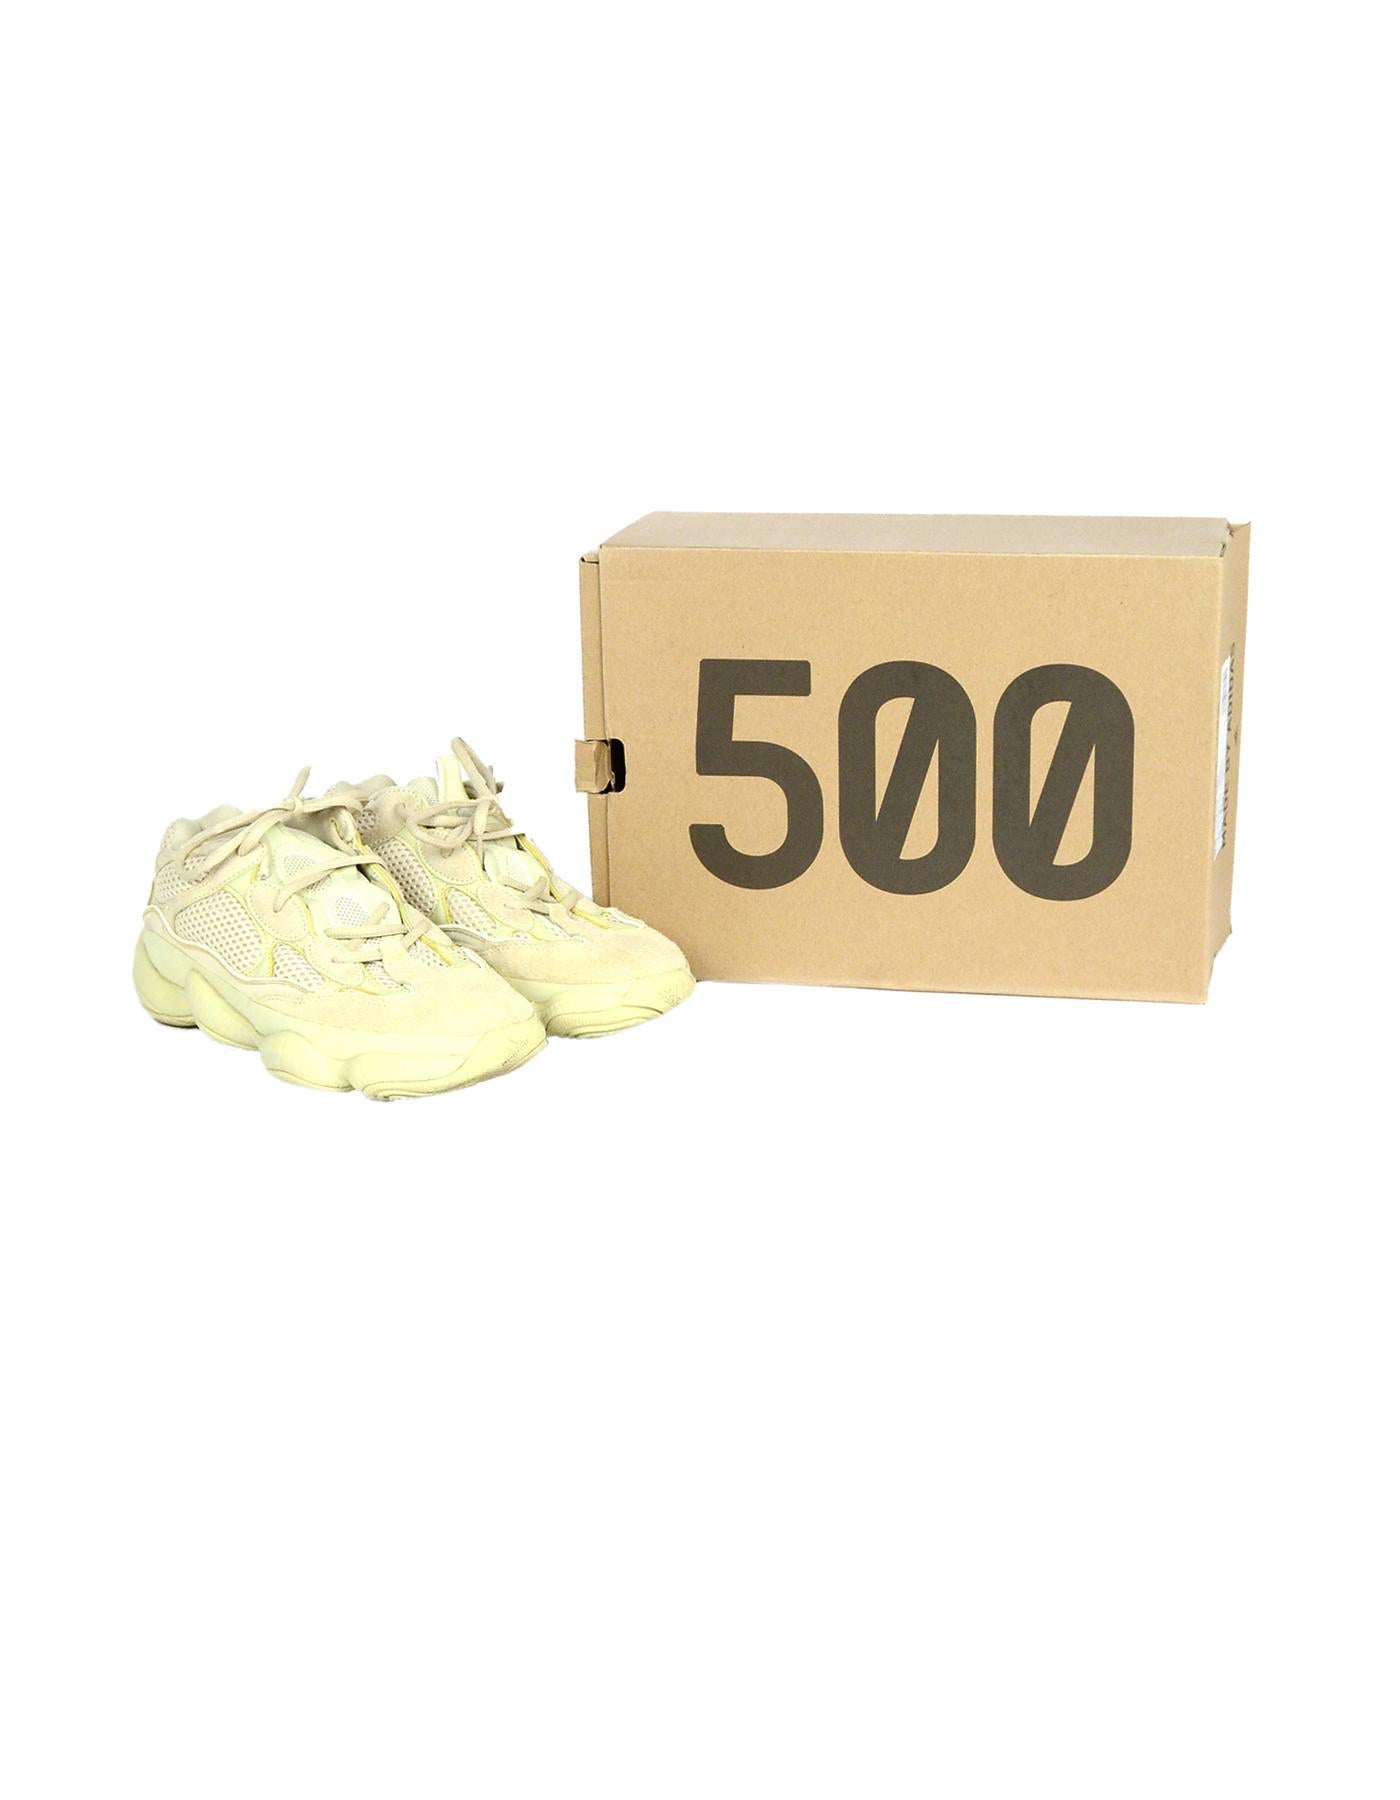 Adidas x Yeezy Unisex 2018 500 Desert Rat Super Moon Yellow Tint Sneakers Sz Men's 7, Women's 8.5

Made In: China
Year of Production: 2018
Color: Yellow tint
Materials: Suede, mesh, leather, rubber
Closure/Opening: Lace up front
Overall Condition: